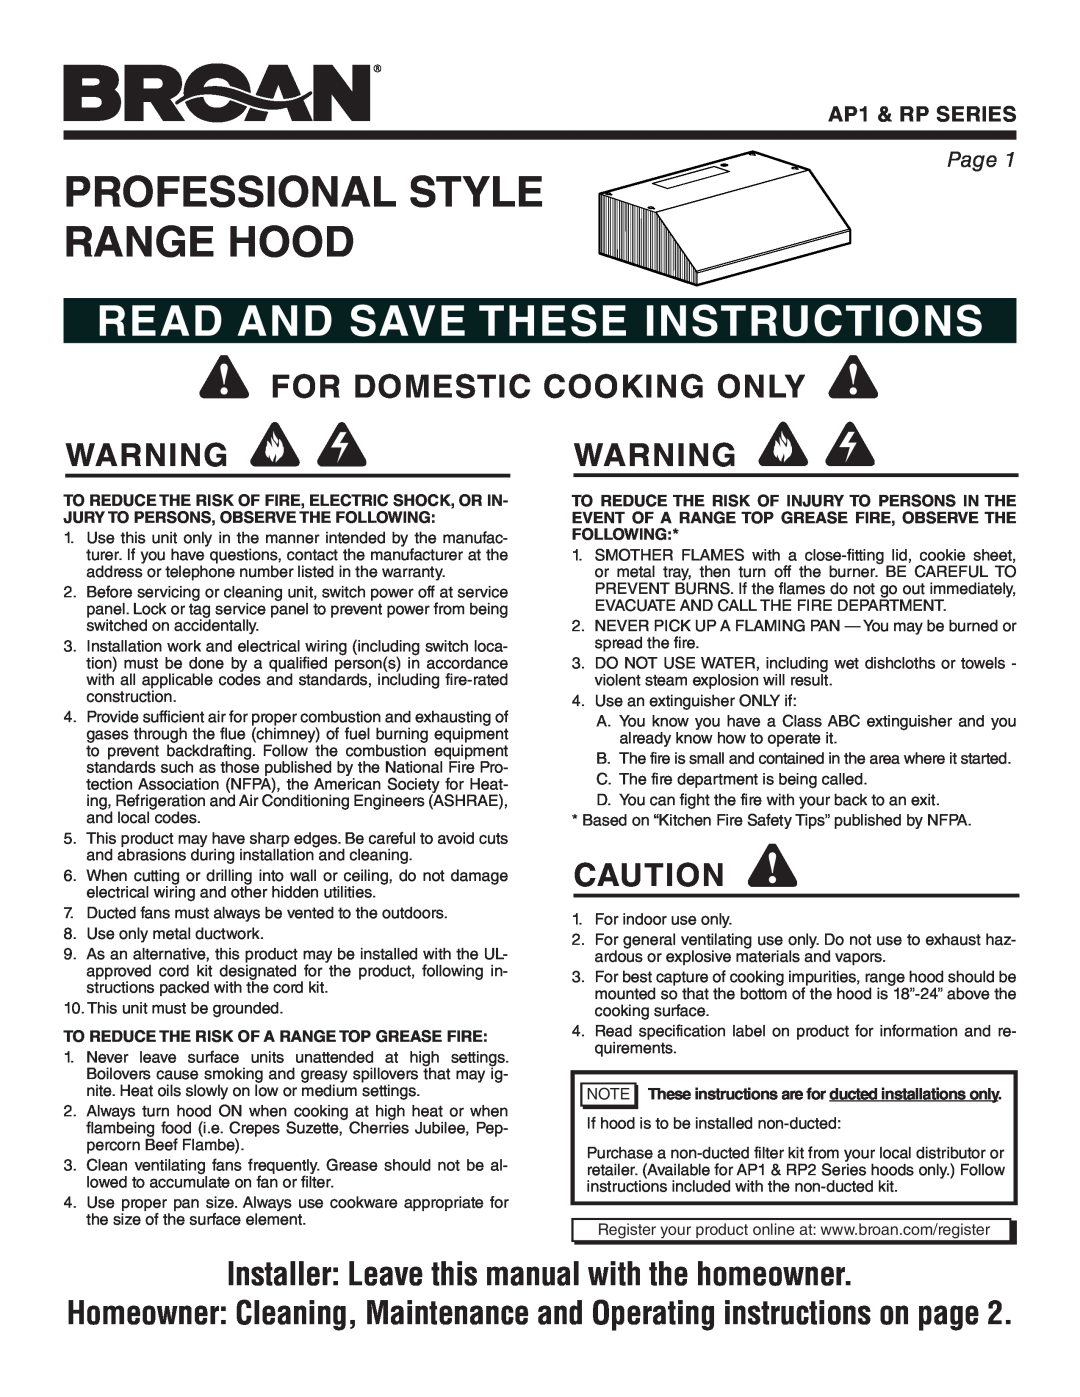 Broan AP1, RP warranty Professional Style Range Hood, Read And Save These Instructions, For Domestic Cooking Only, Page 